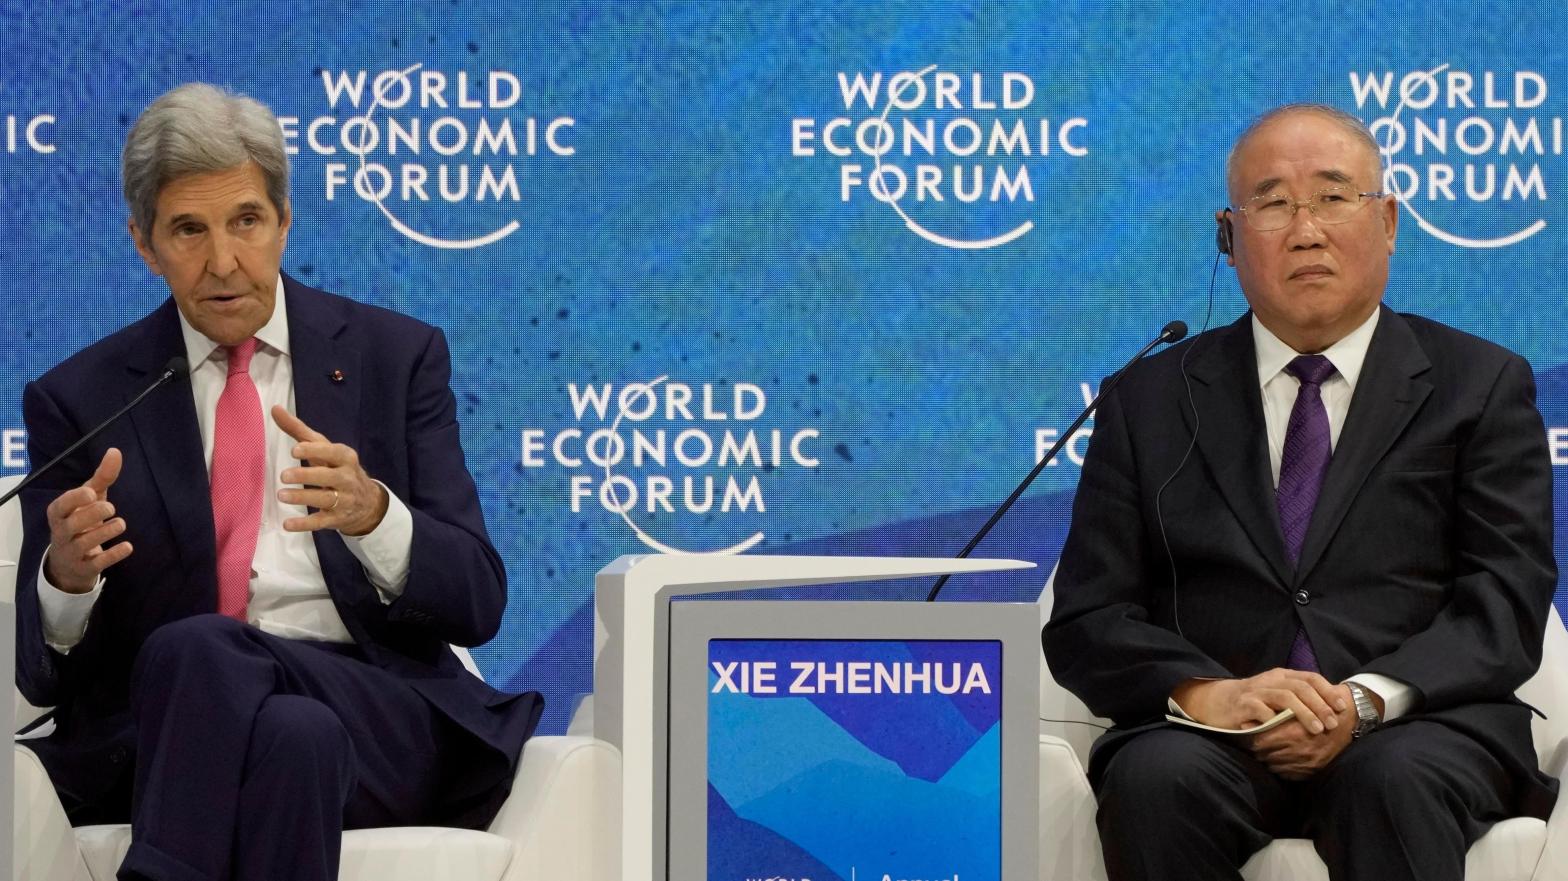 John F. Kerry, Special Presidential Envoy for Climate of the United States and Xie Zhenhua, Special Envoy for Climate Change of the People's Republic of China, together during the World Economic Forum in Davos, Switzerland in May.  (Photo: Markus Schreiber, AP)